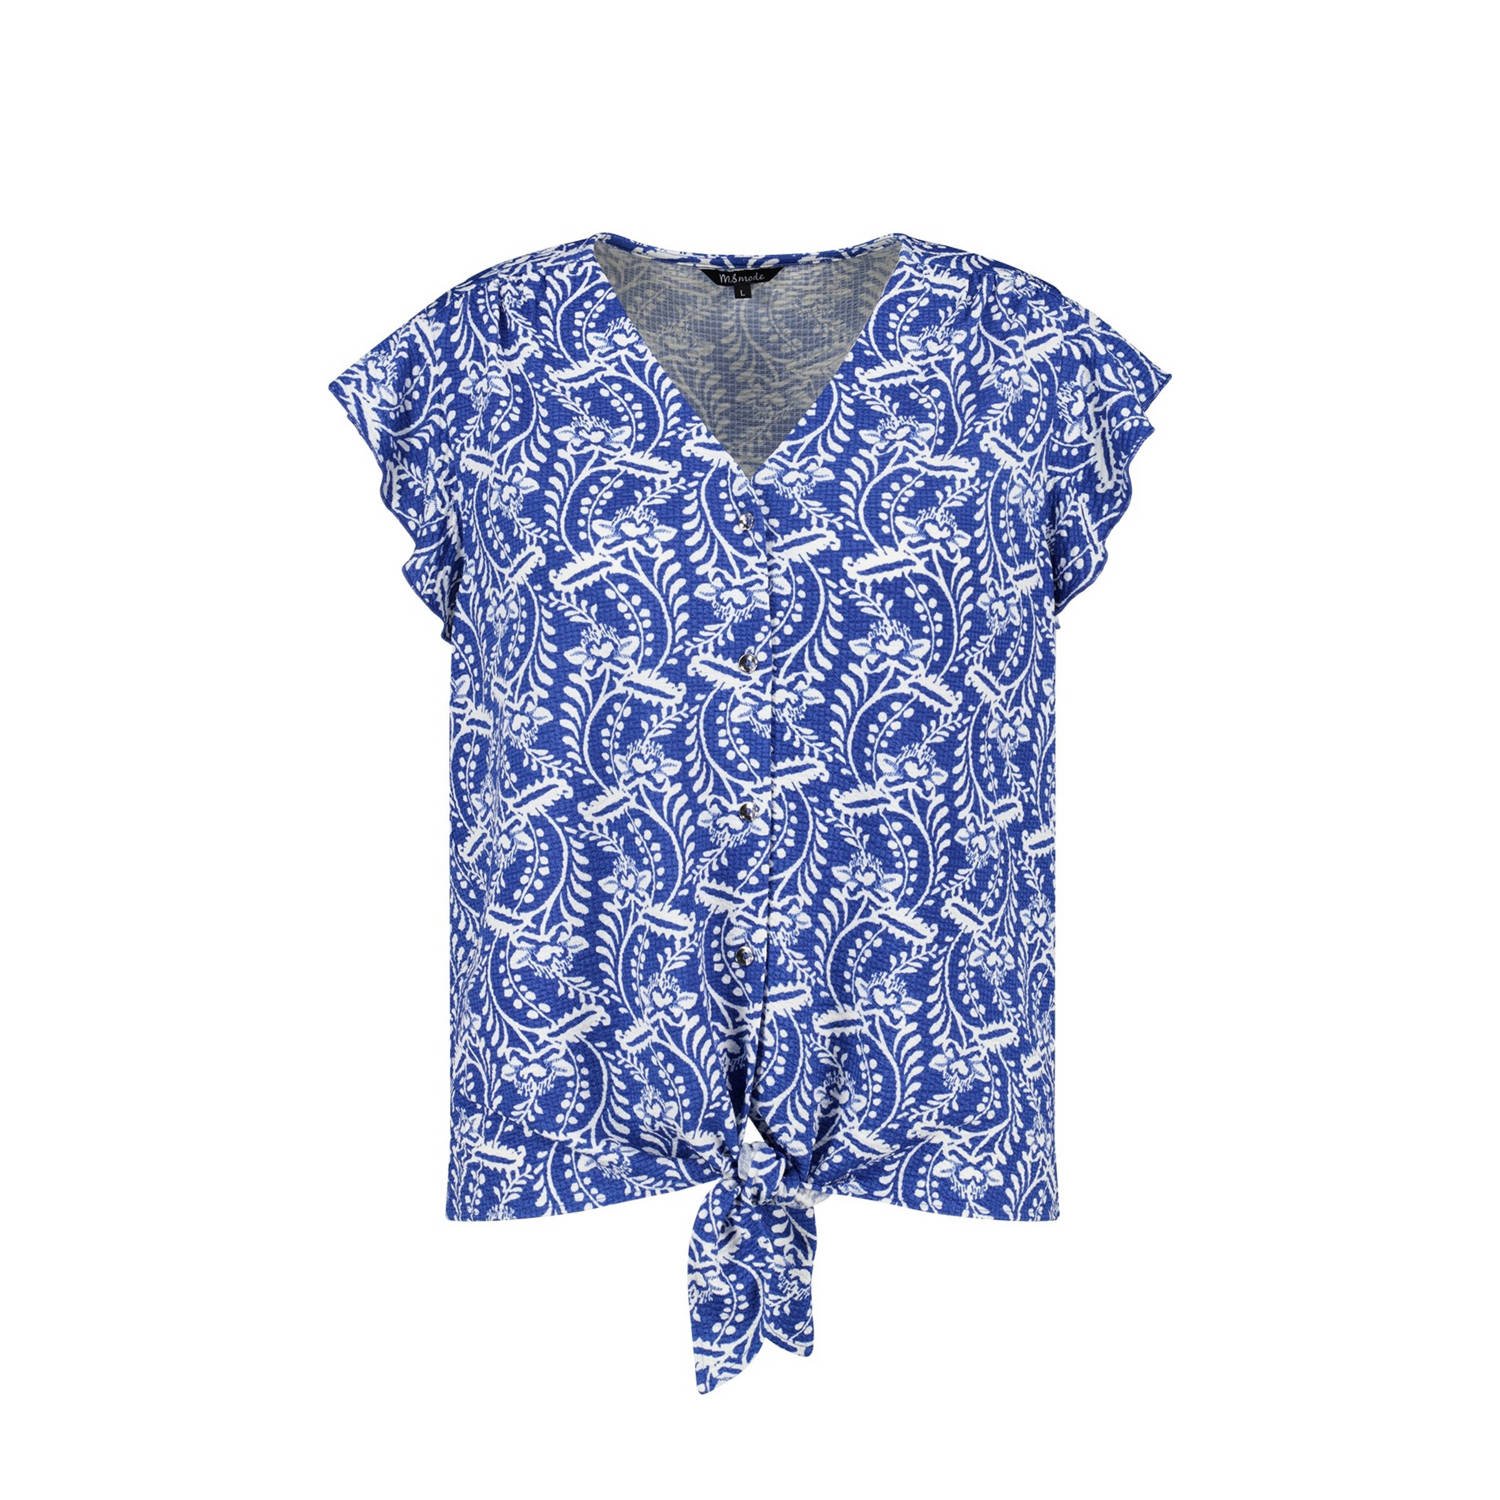 MS Mode blouse met all over print en ruches blauw wit